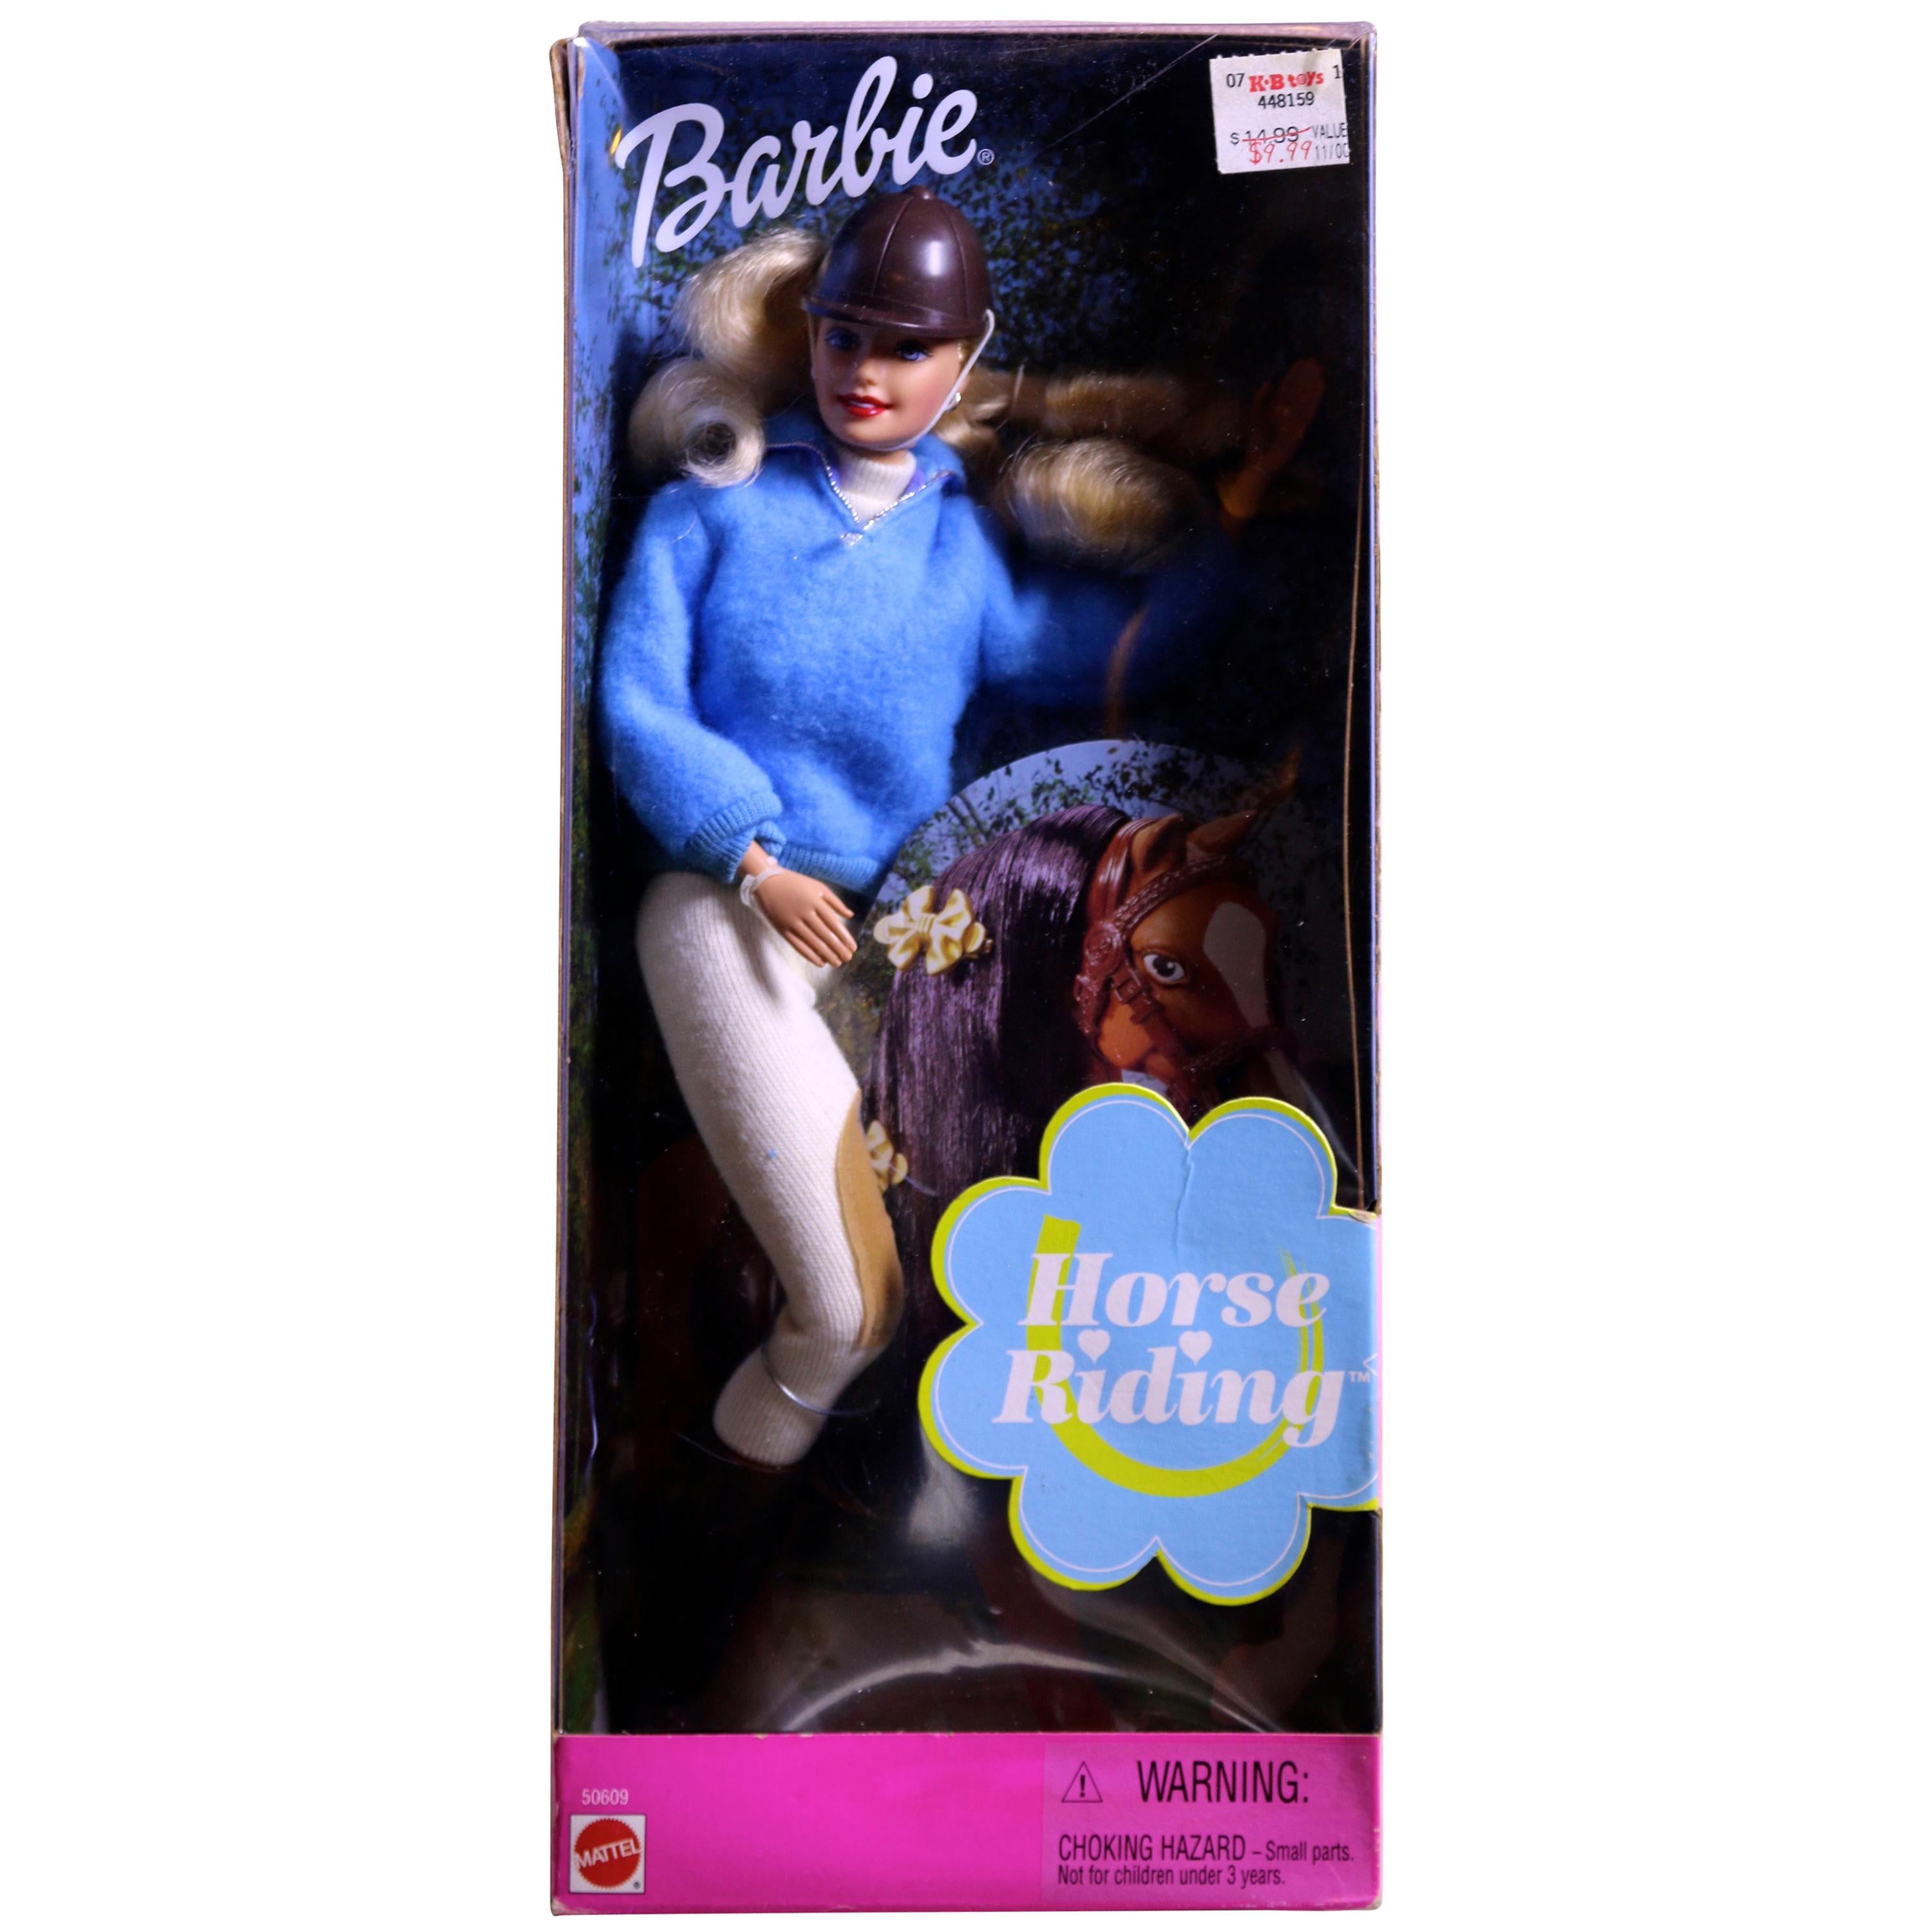 Barbie Horse Riding Doll with Riding Breeches, Helmet and More, 2000 For Sale